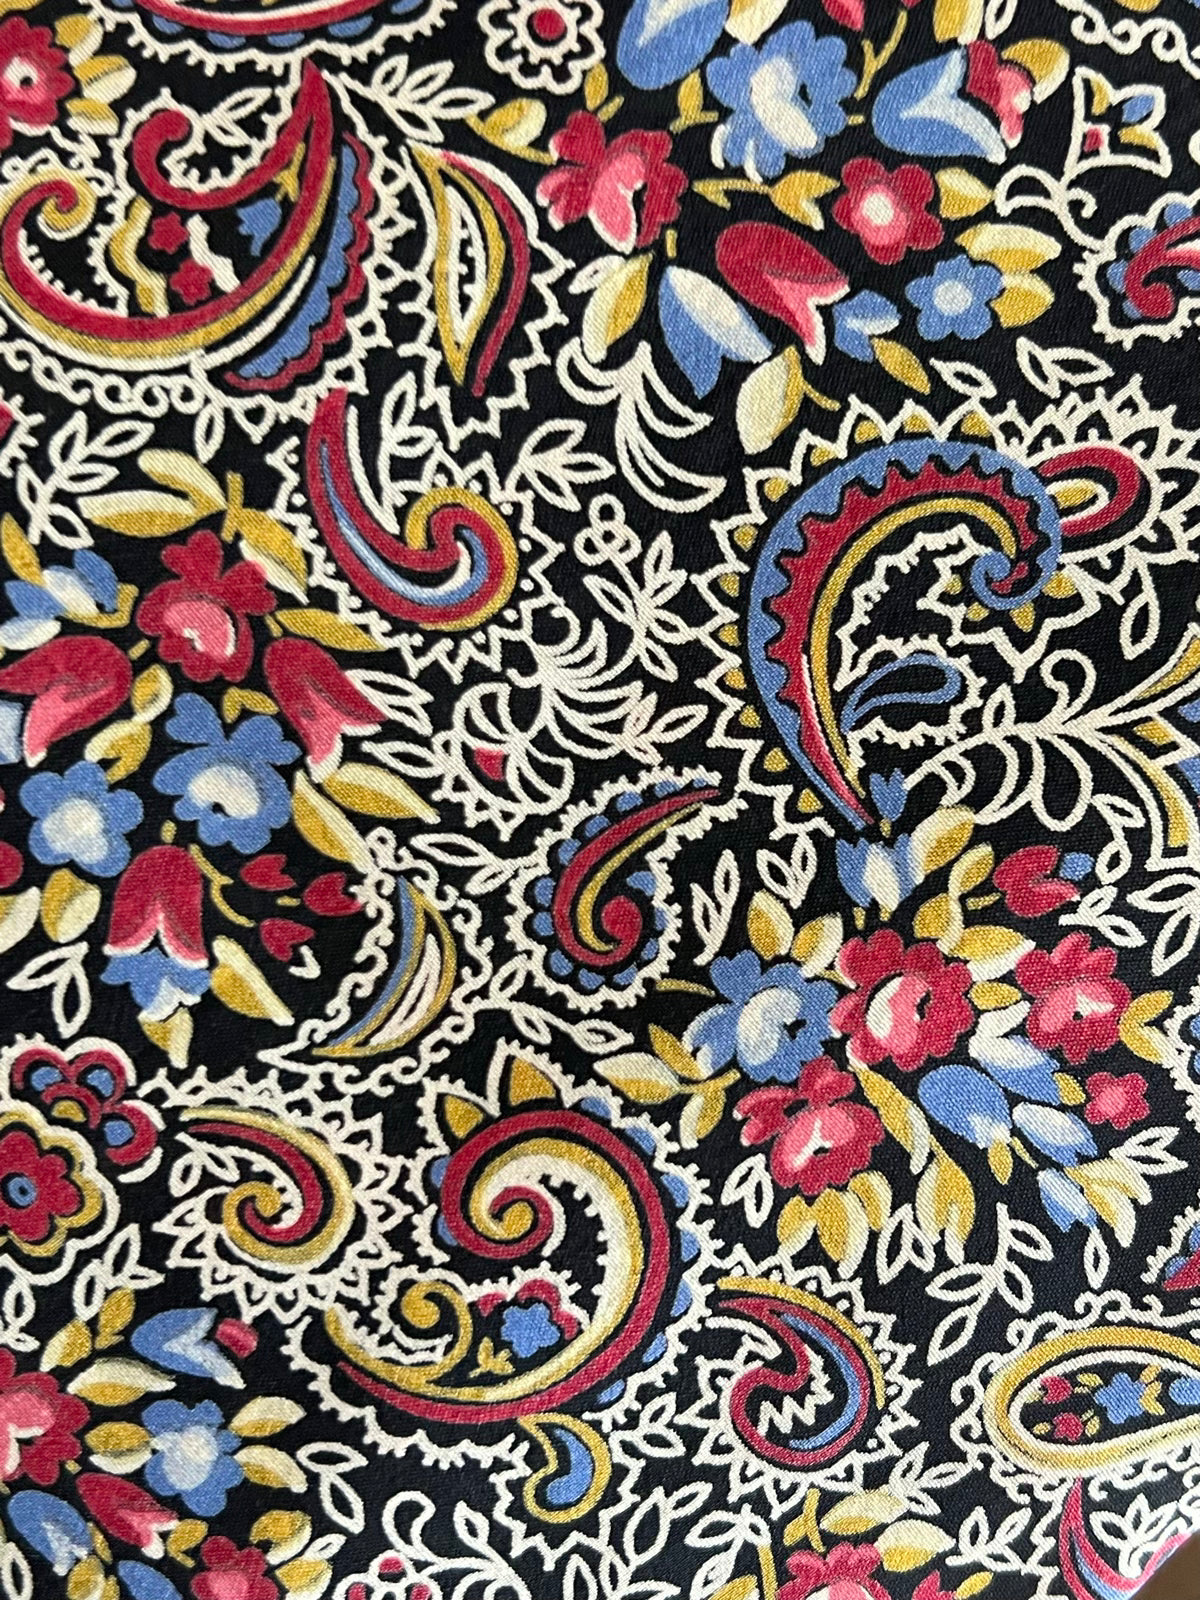 1940s-1950s Floral Paisley Rayon